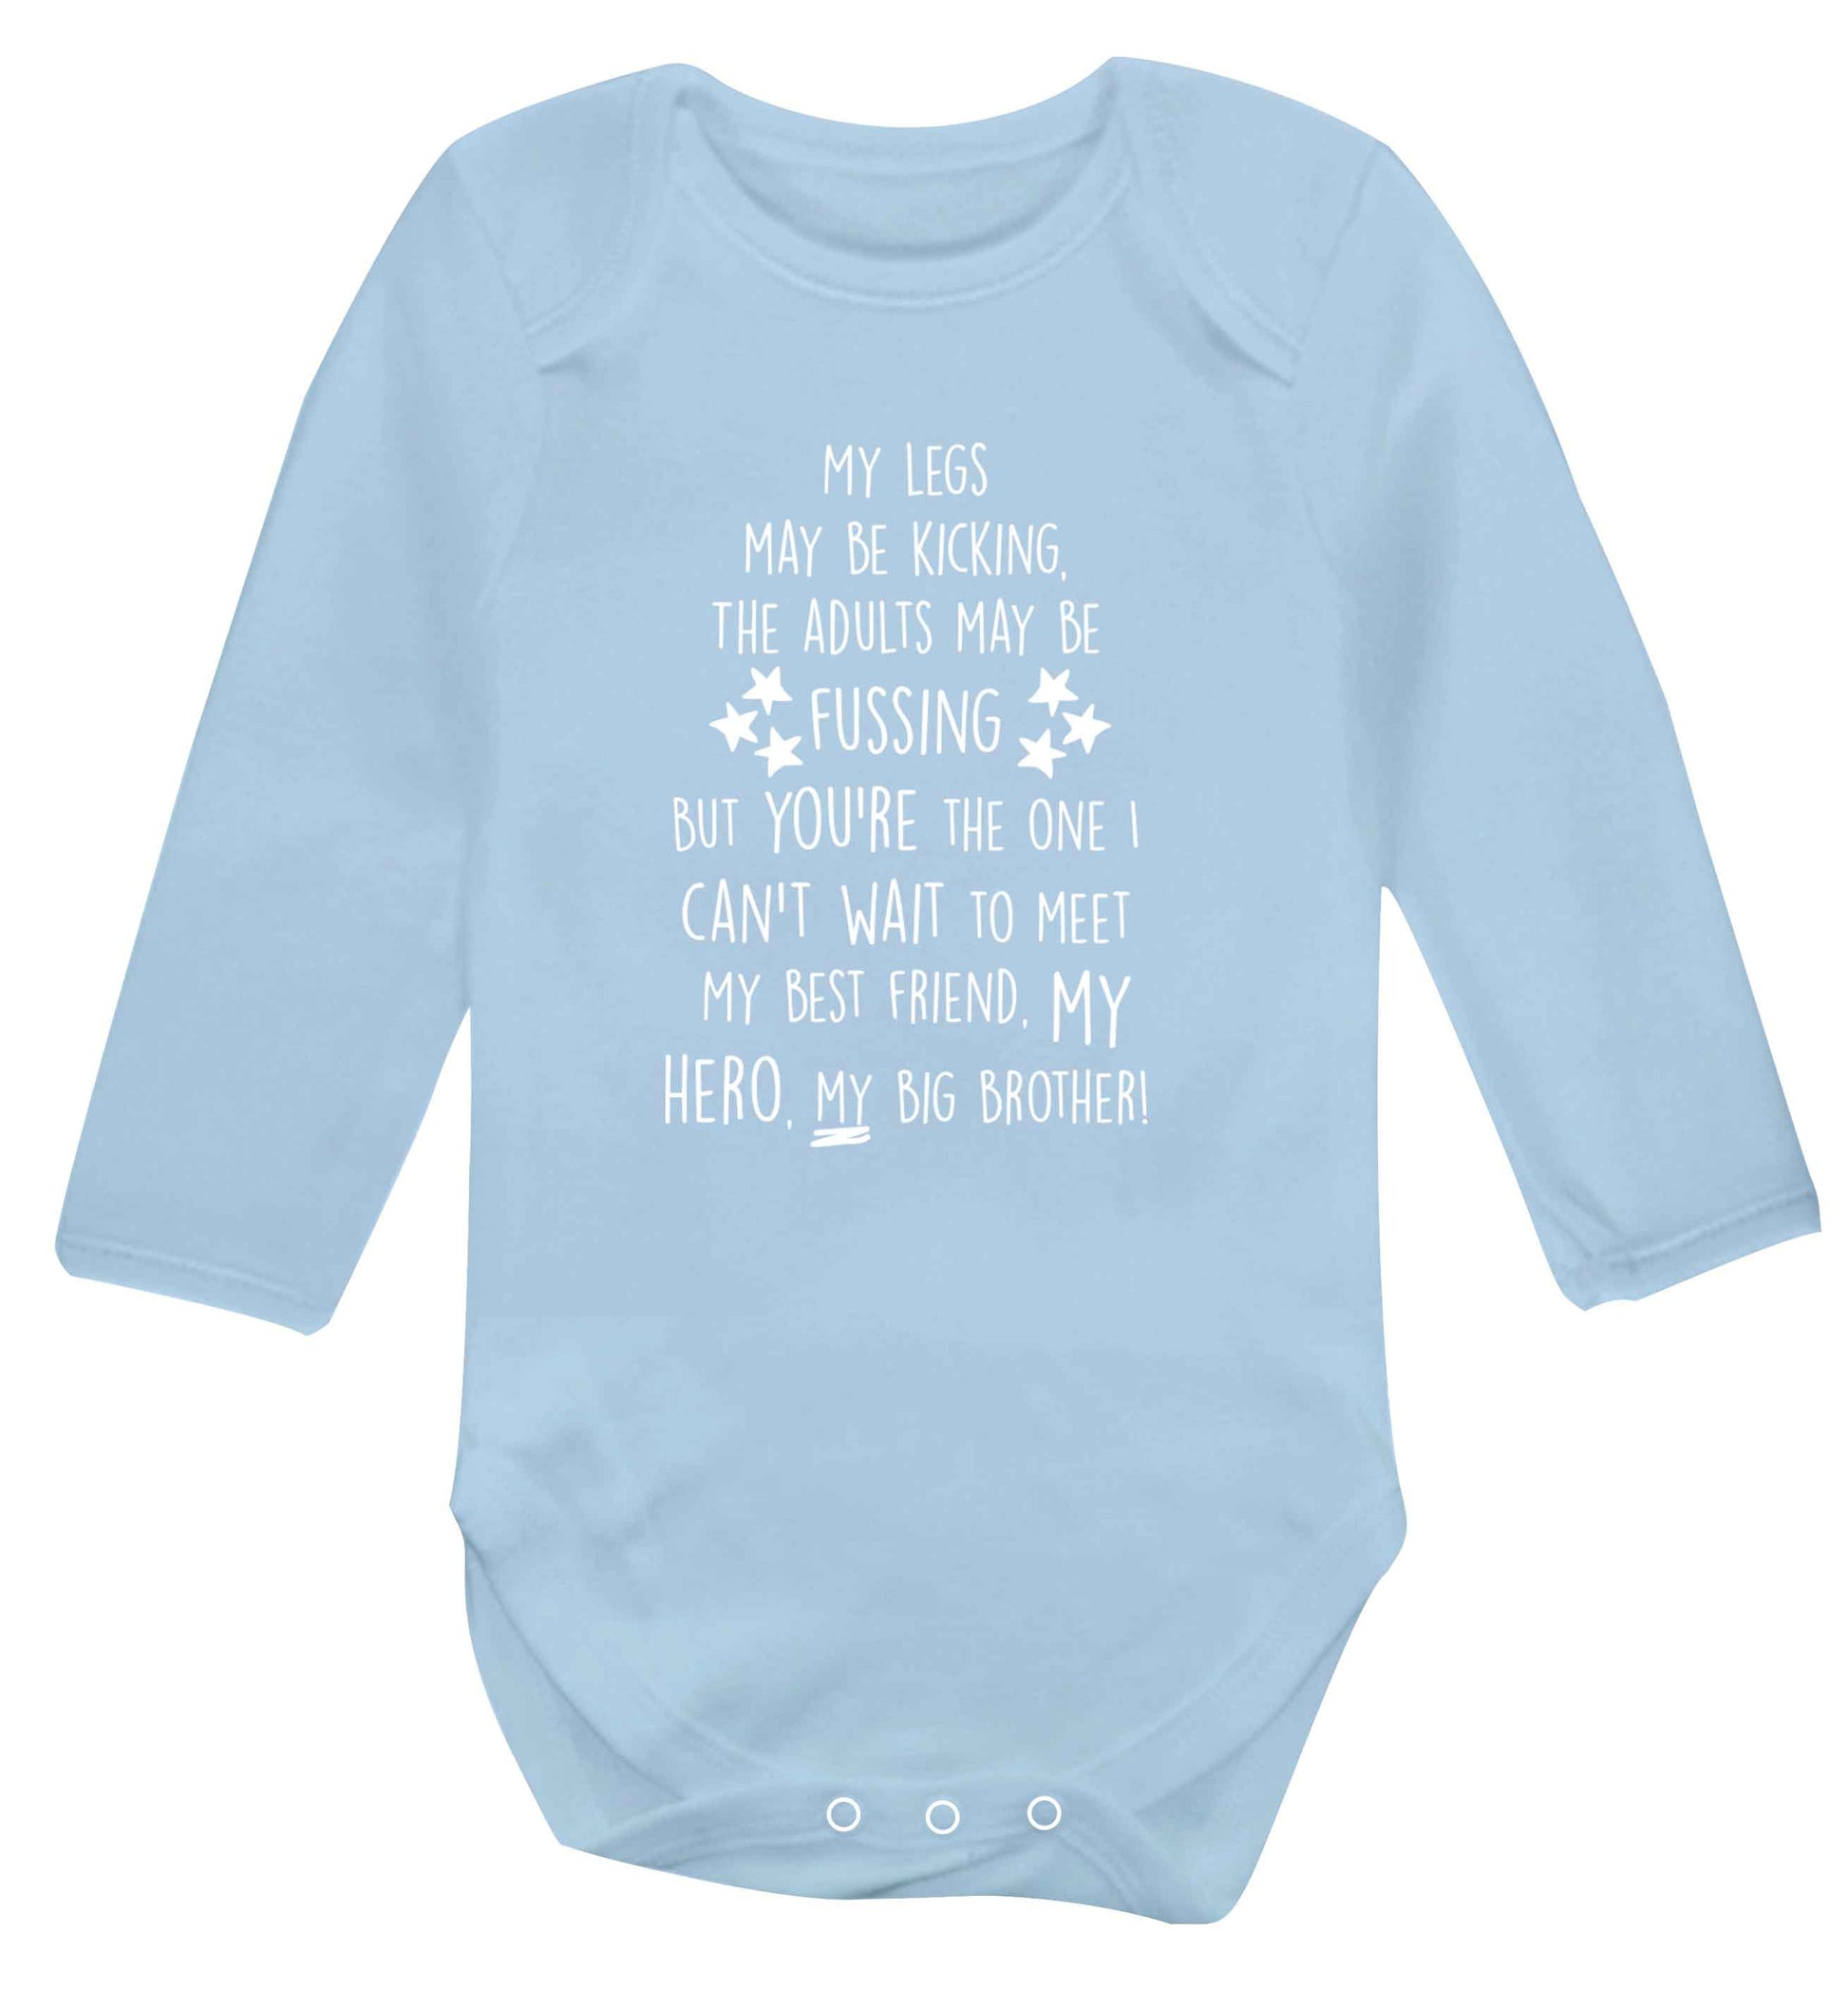 A poem from bump to big brother Baby Vest long sleeved pale blue 6-12 months